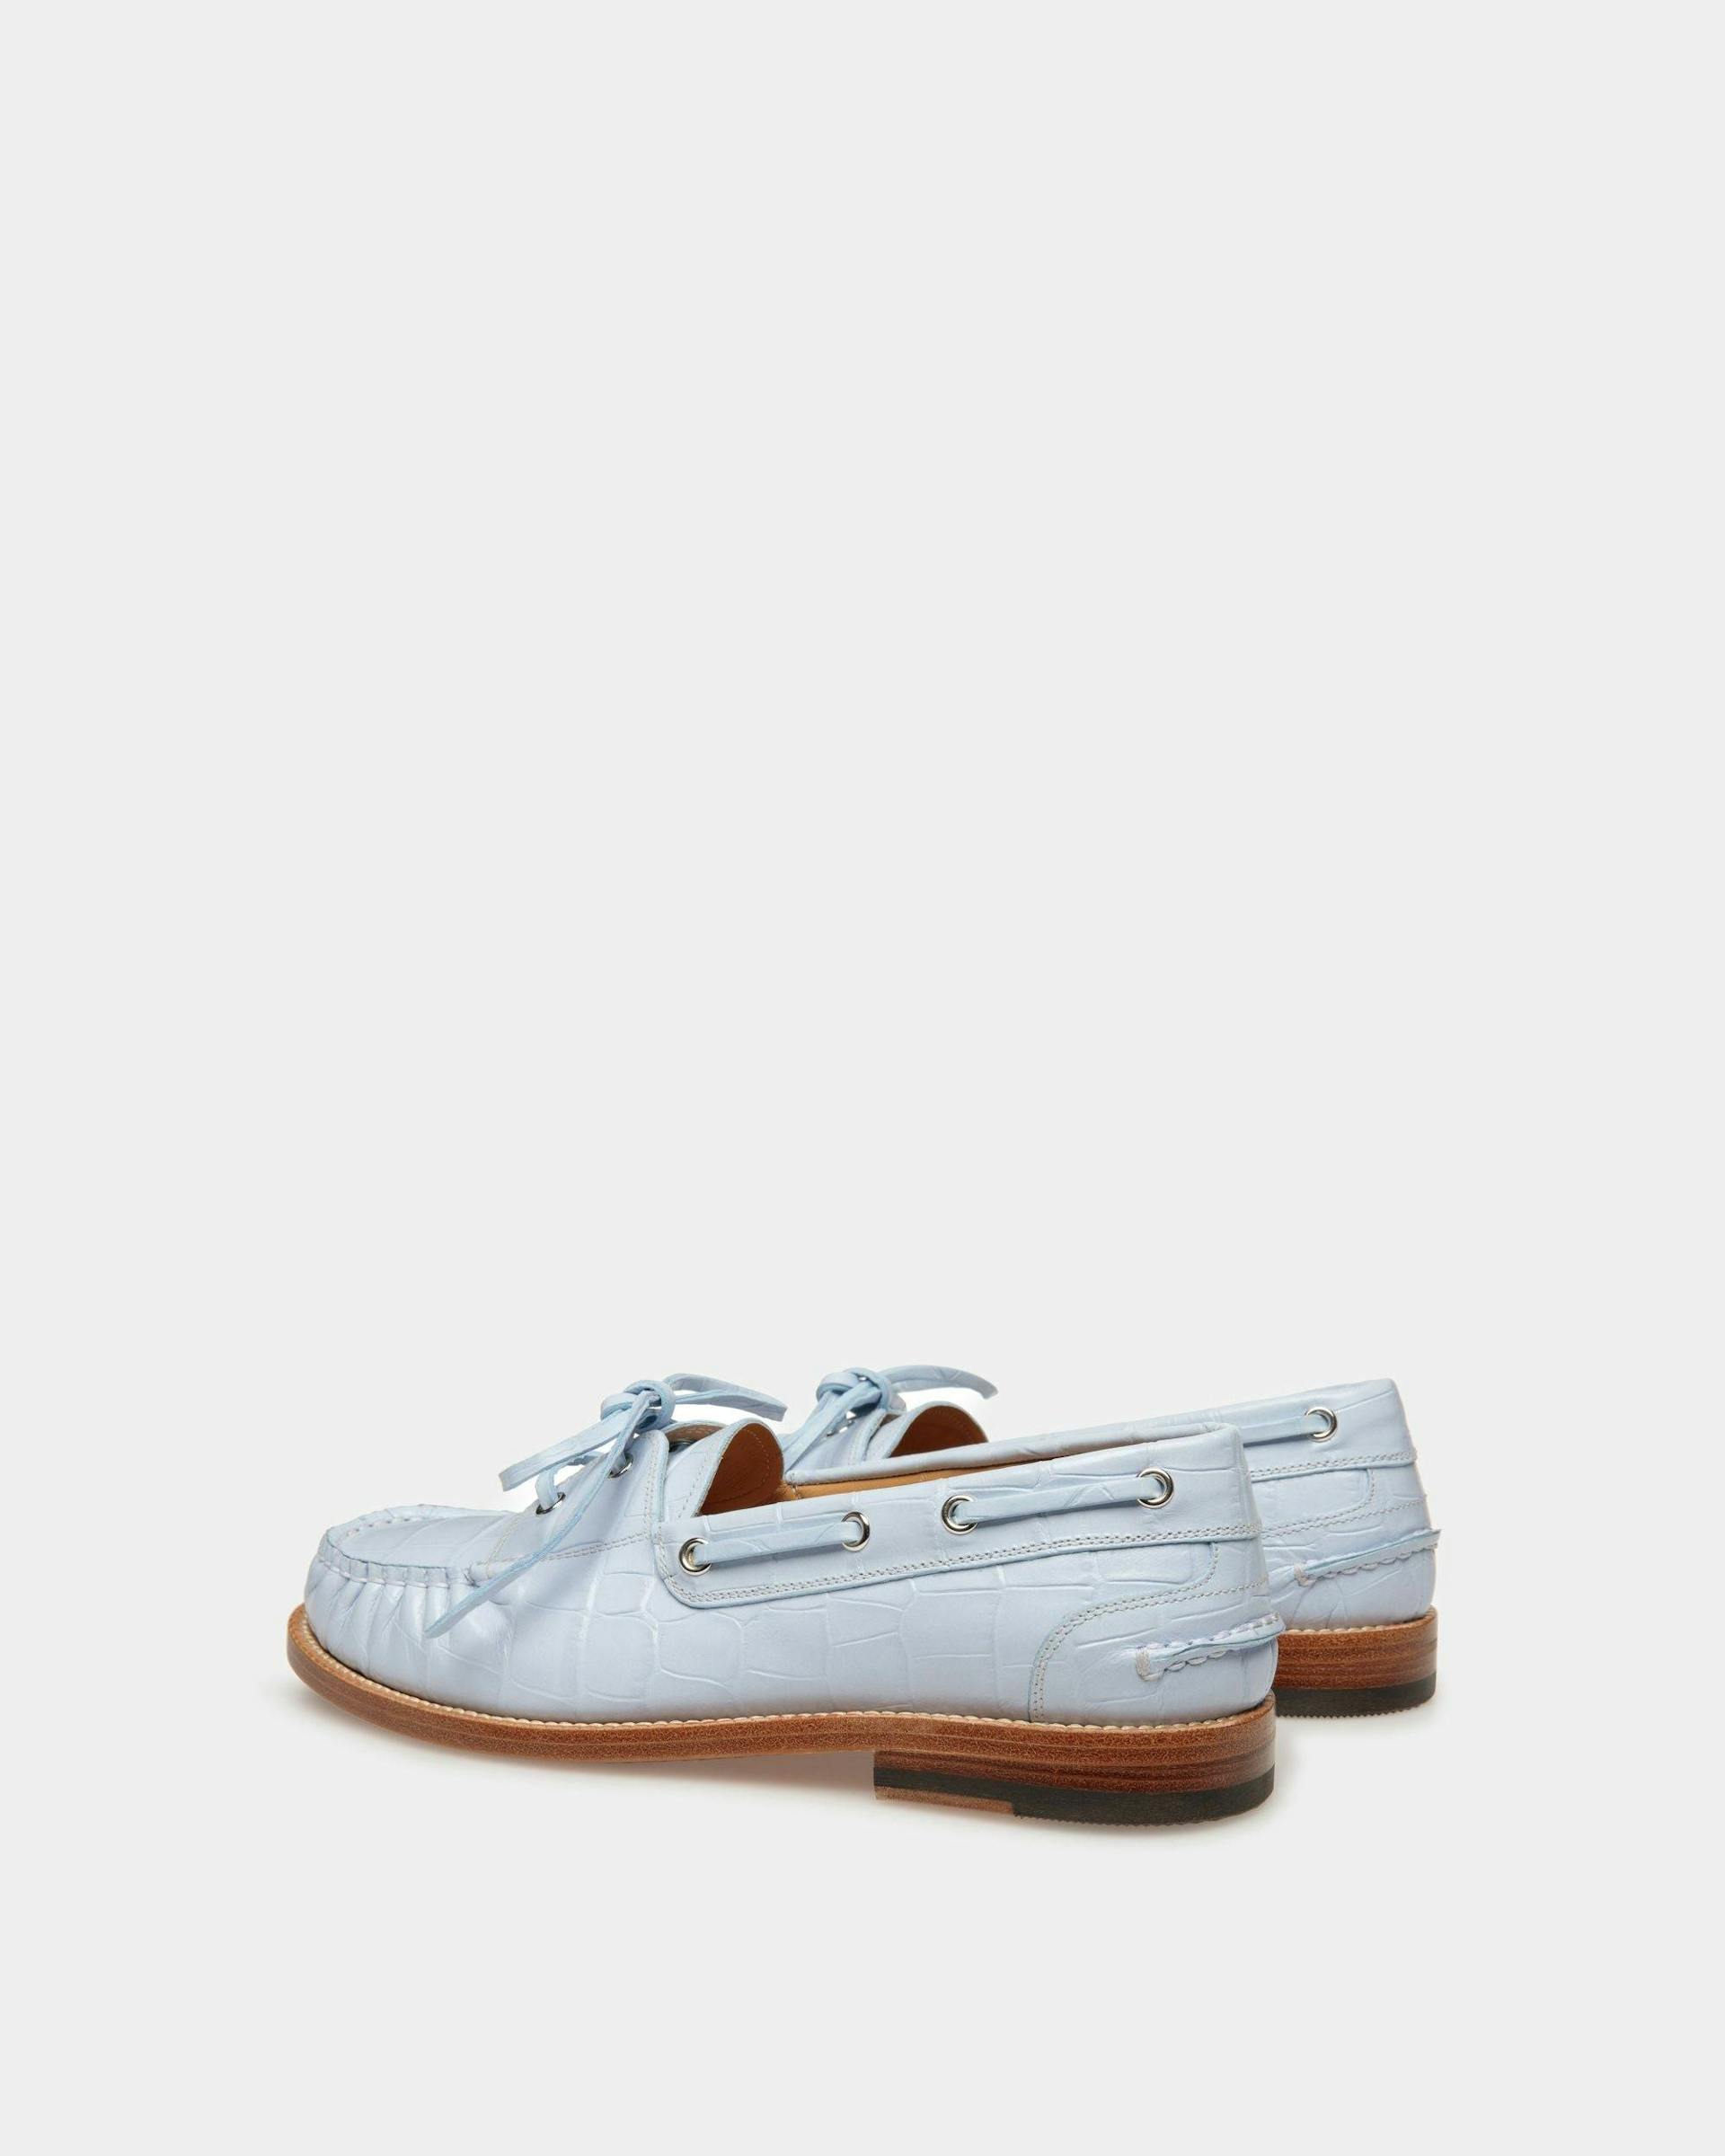 Rome Moccasins In Light Blue Leather - Women's - Bally - 03